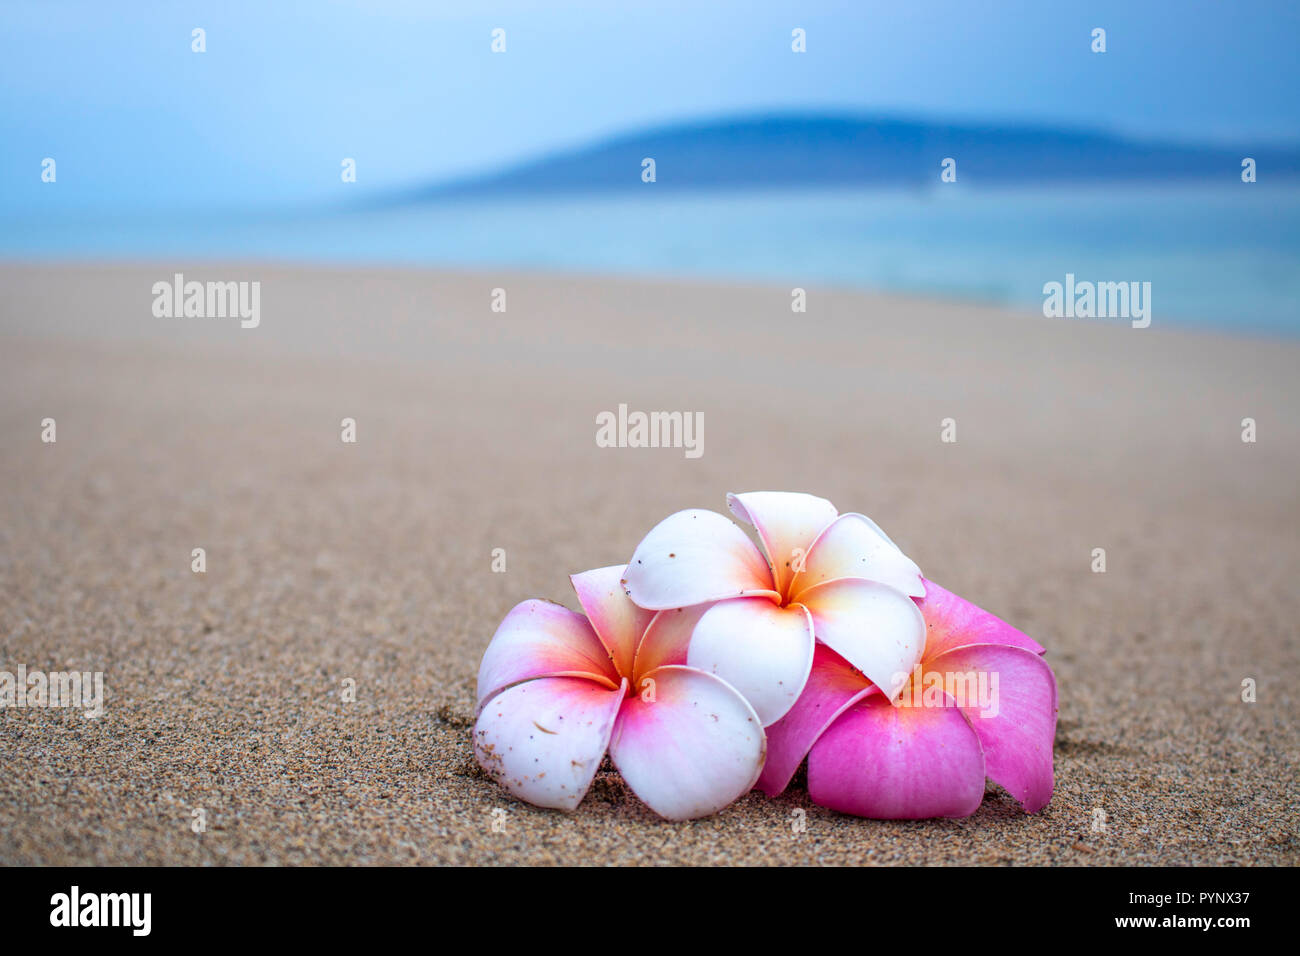 Three Brightly Colored Tropical Blossoms on Sandy Beach in Foreground with Island and Ocean on Horizon Stock Photo